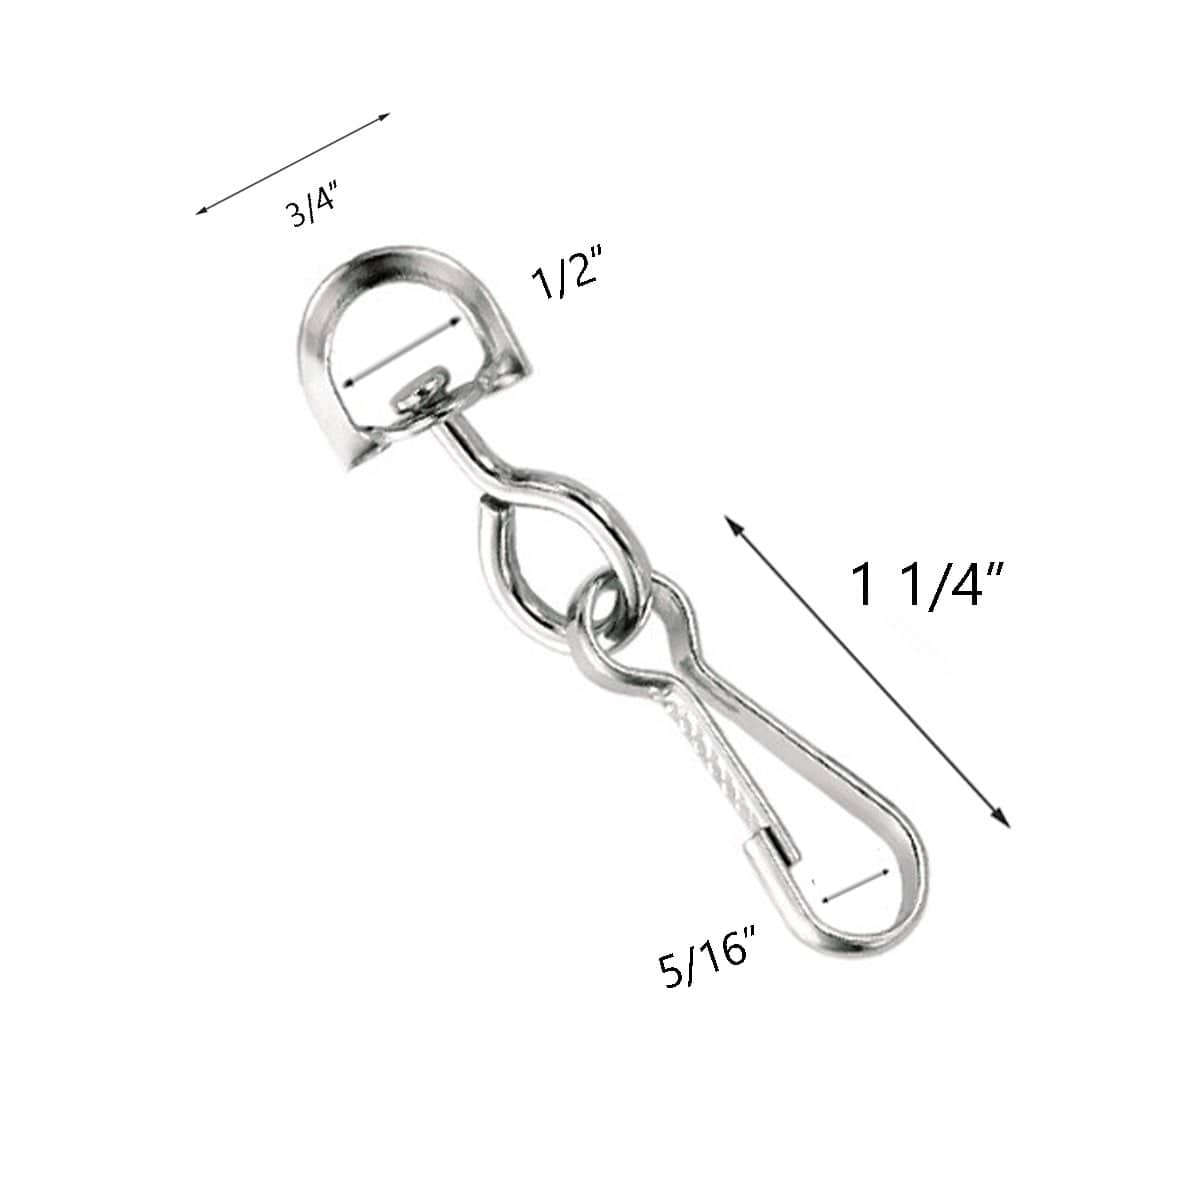 1/2-inch Swivel Snaps for Dog Leashes or Straps: Carabiners, Clips, Snap  Hooks & Lanyard Hooks Products